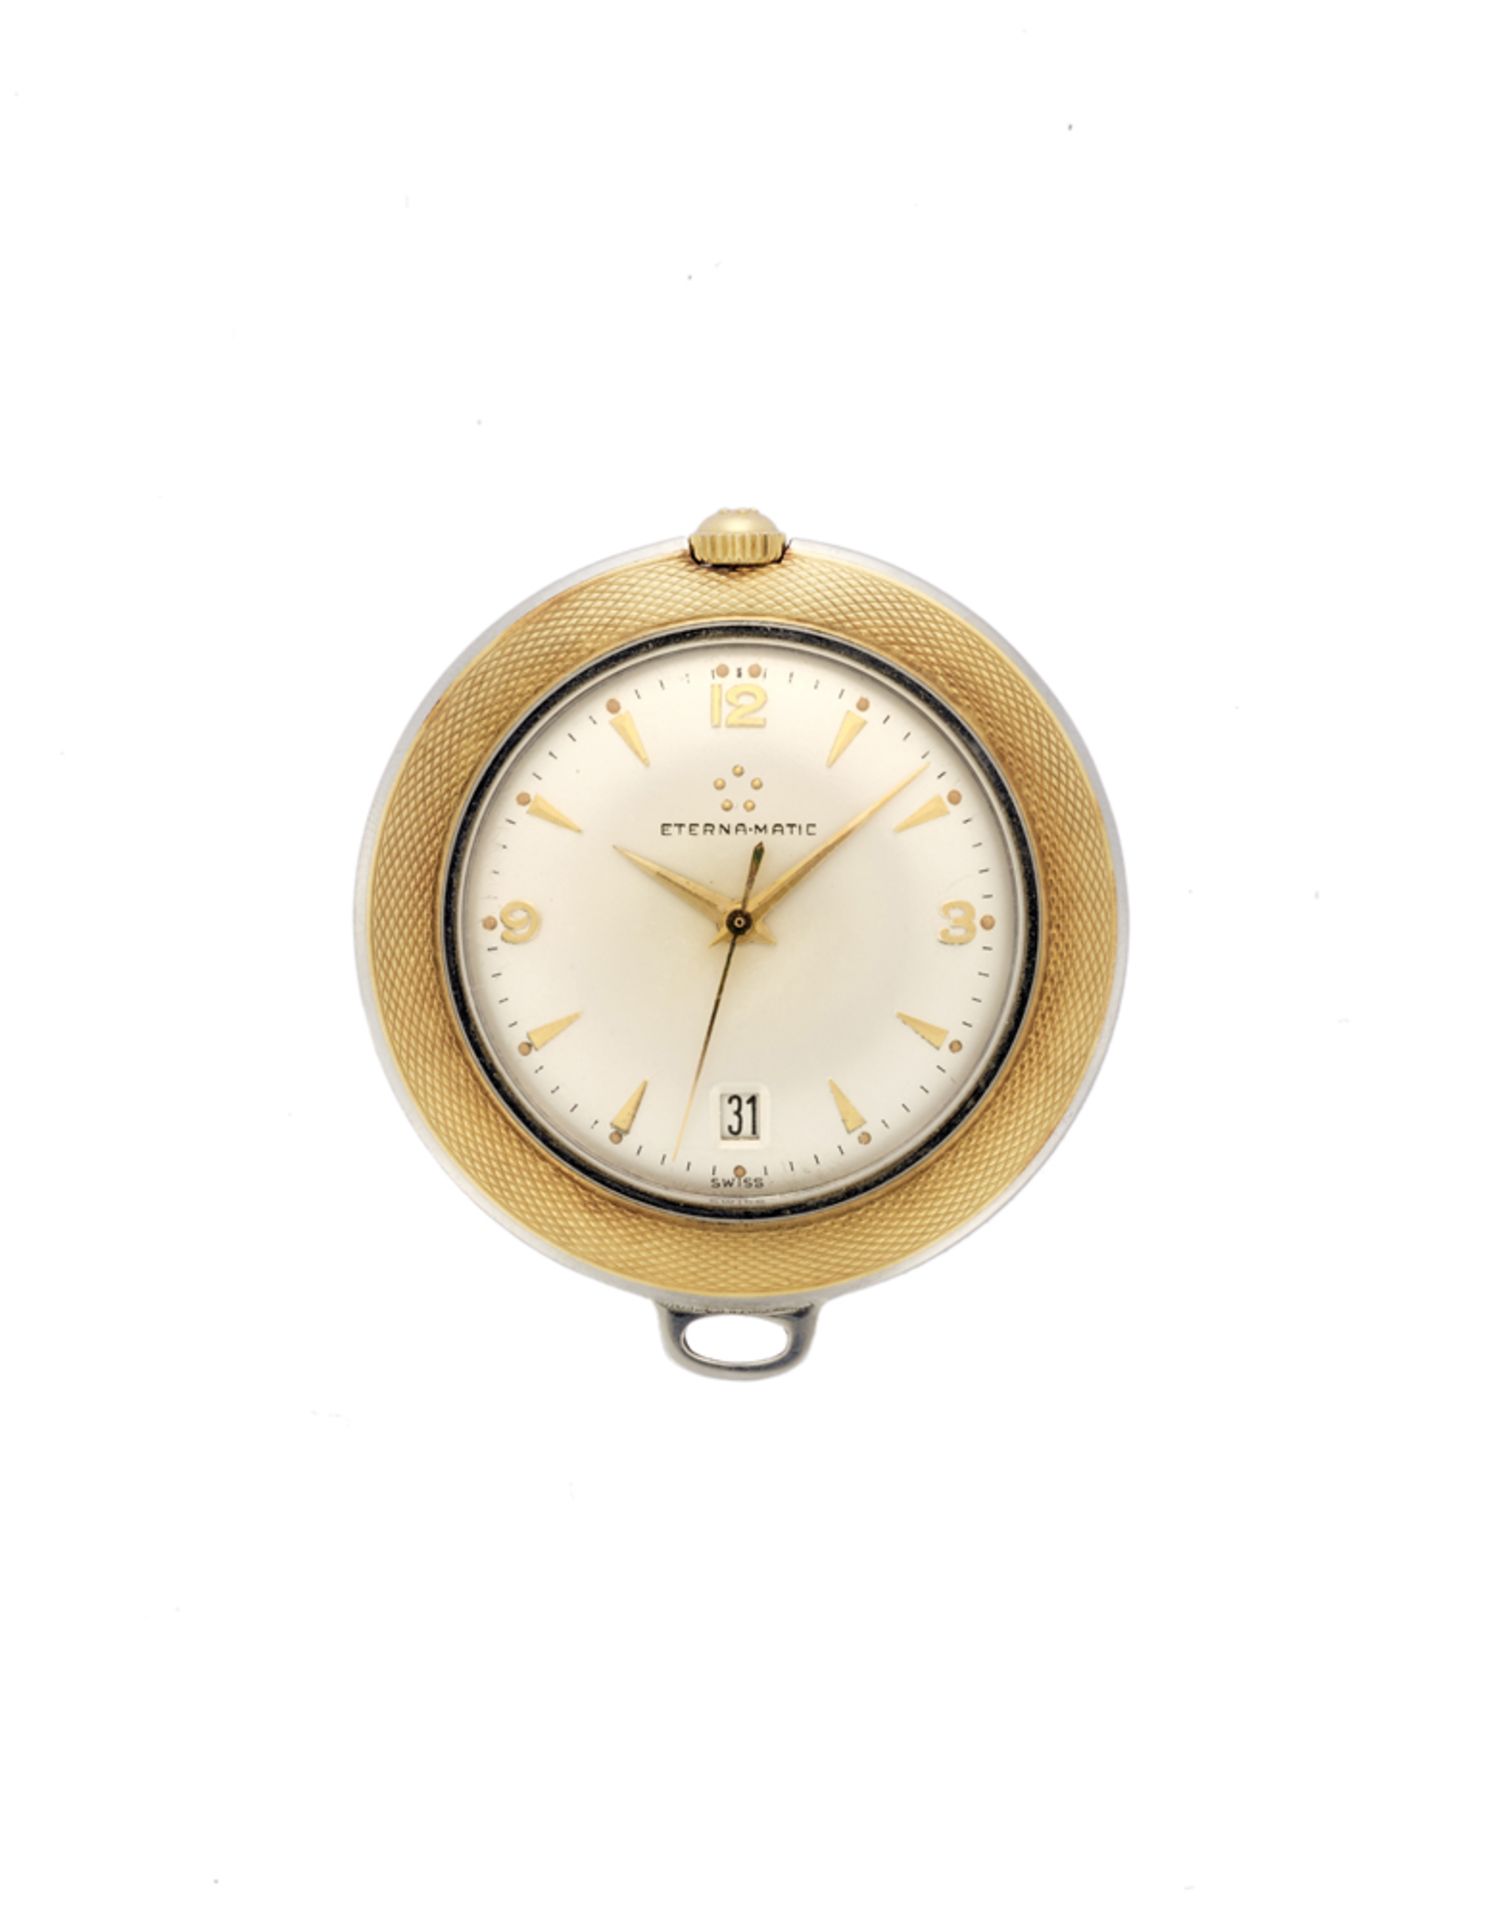 ETERNAMATIC, GOLFERGent's Steel and metal plated-gold pocket watch1960sDial, movement and case